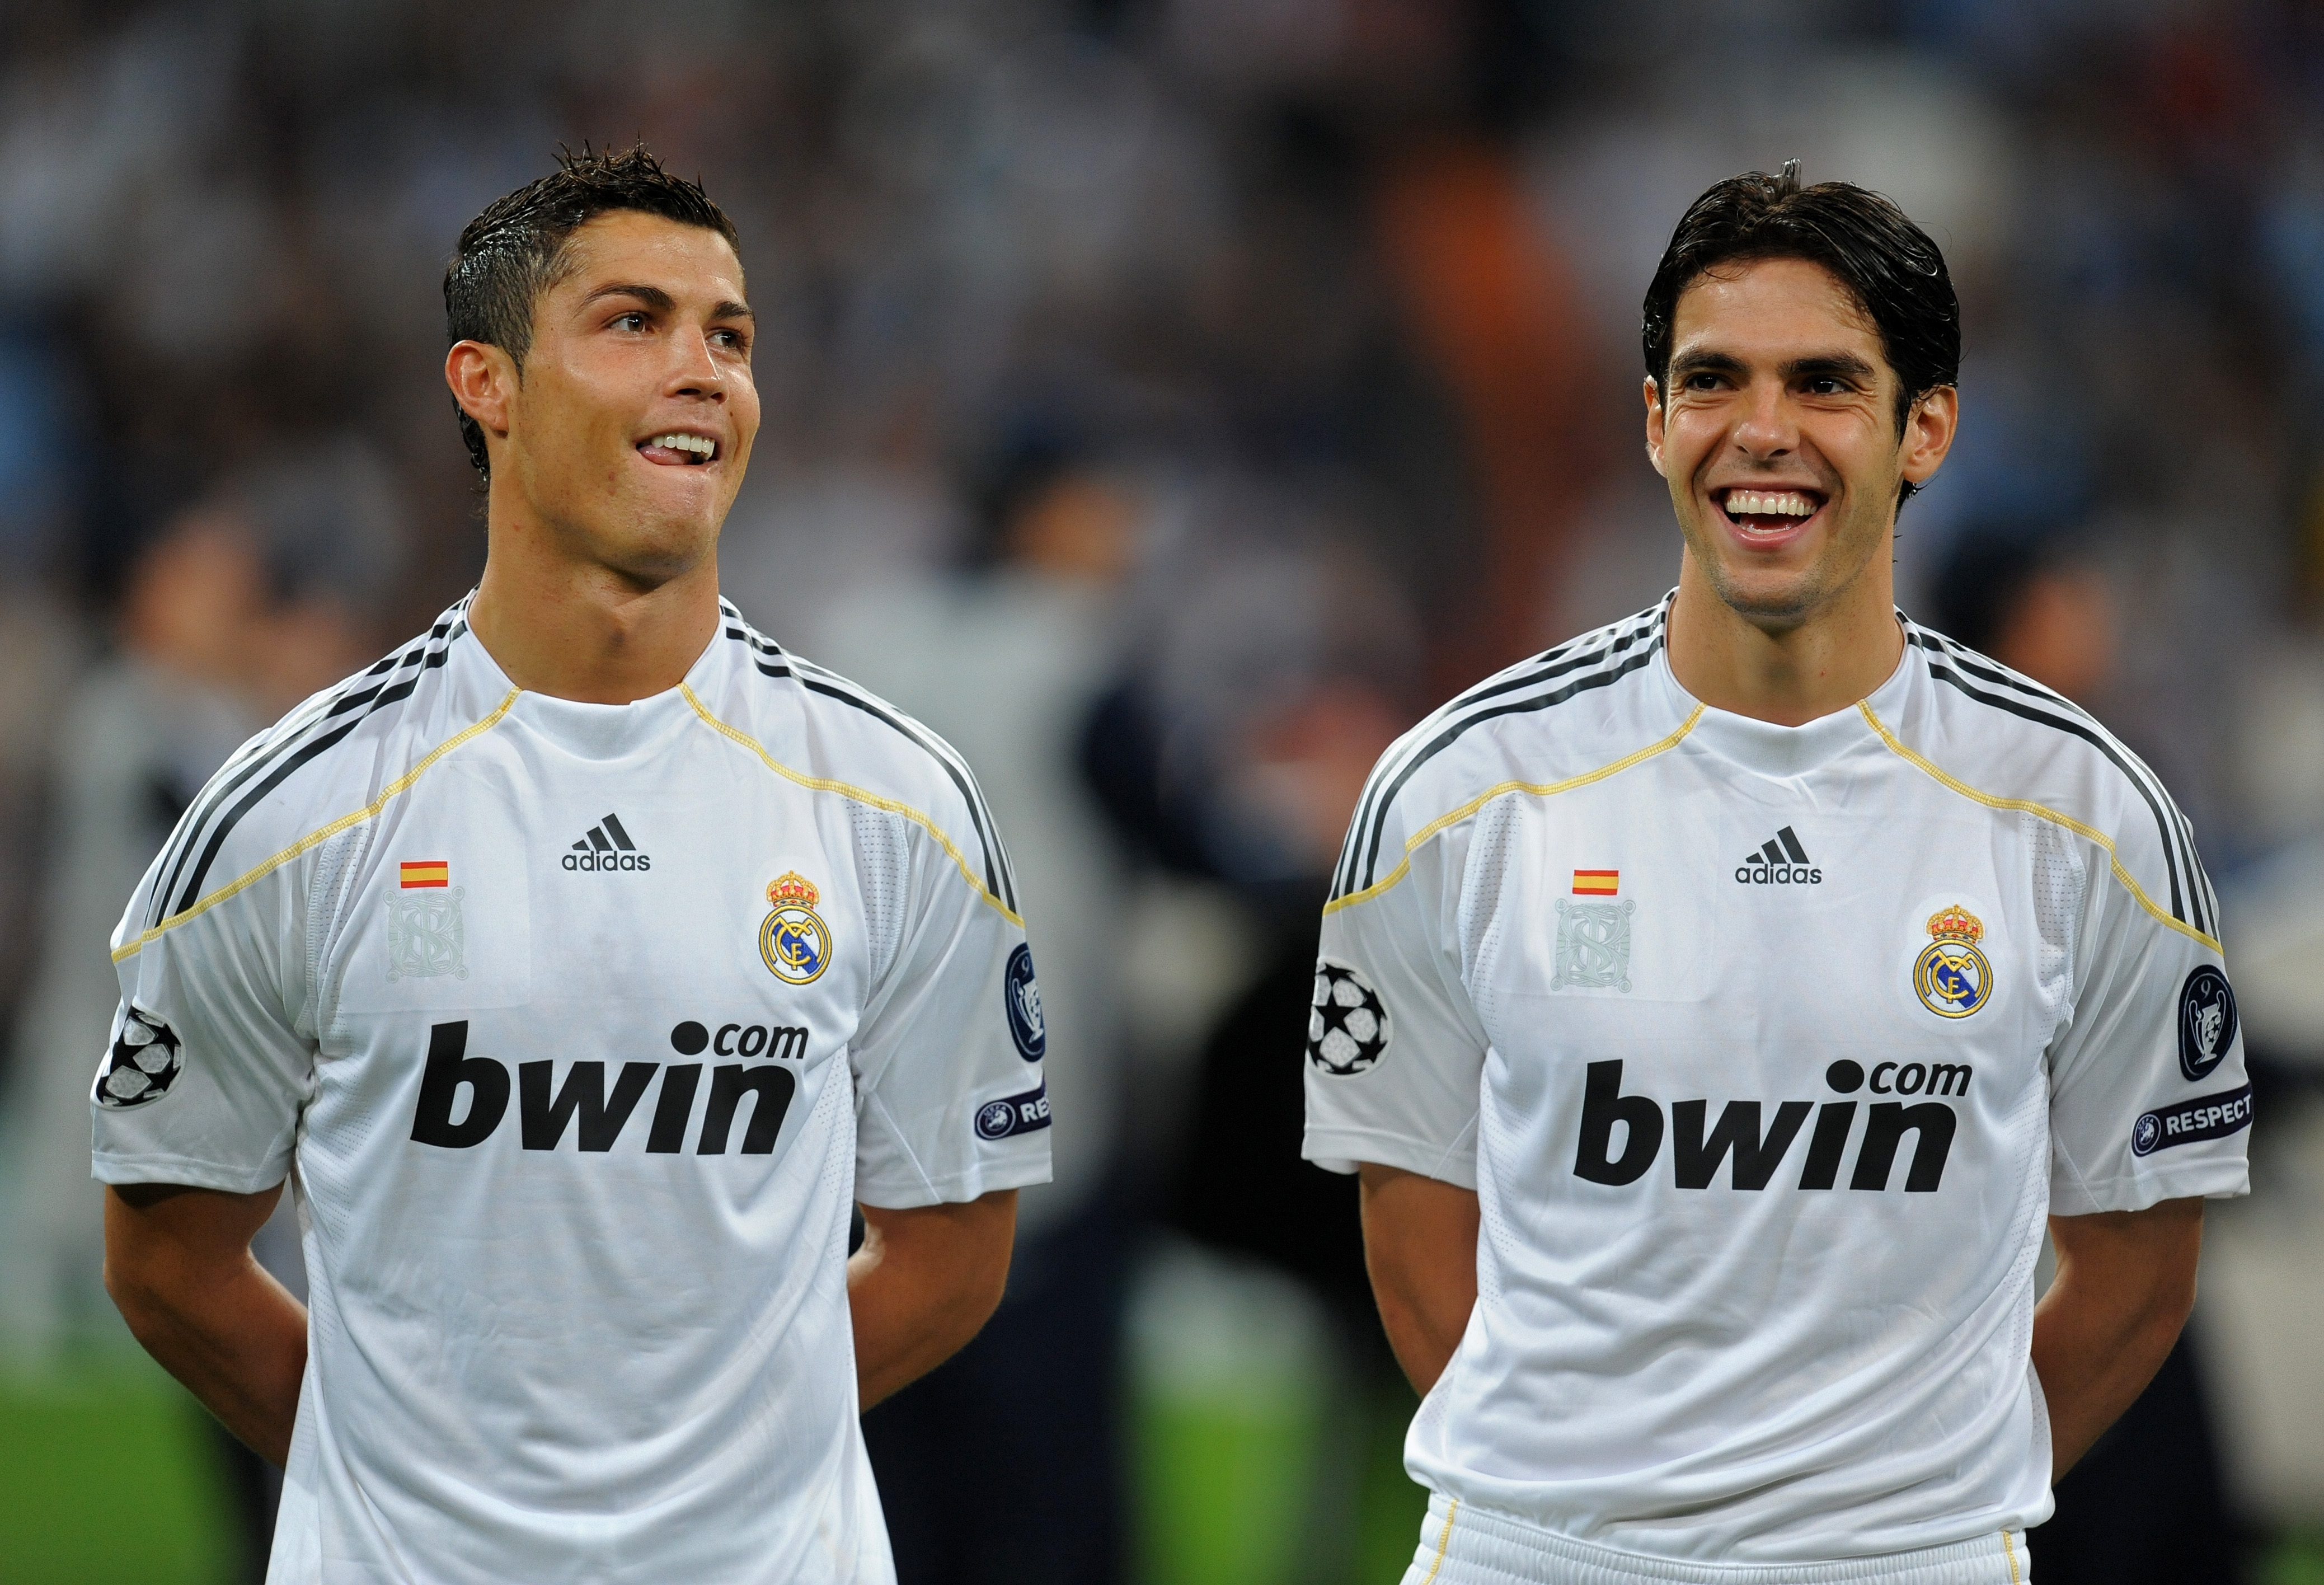 MADRID, SPAIN - SEPTEMBER 30:  Cristiano Ronaldo (L) and Kaka of Real Madrid share a light moment prior to the Champions League group C match between Real Madrid and Marseille at the Estadio Santiago Bernabeu on September 30, 2009 in Madrid, Spain. Real M